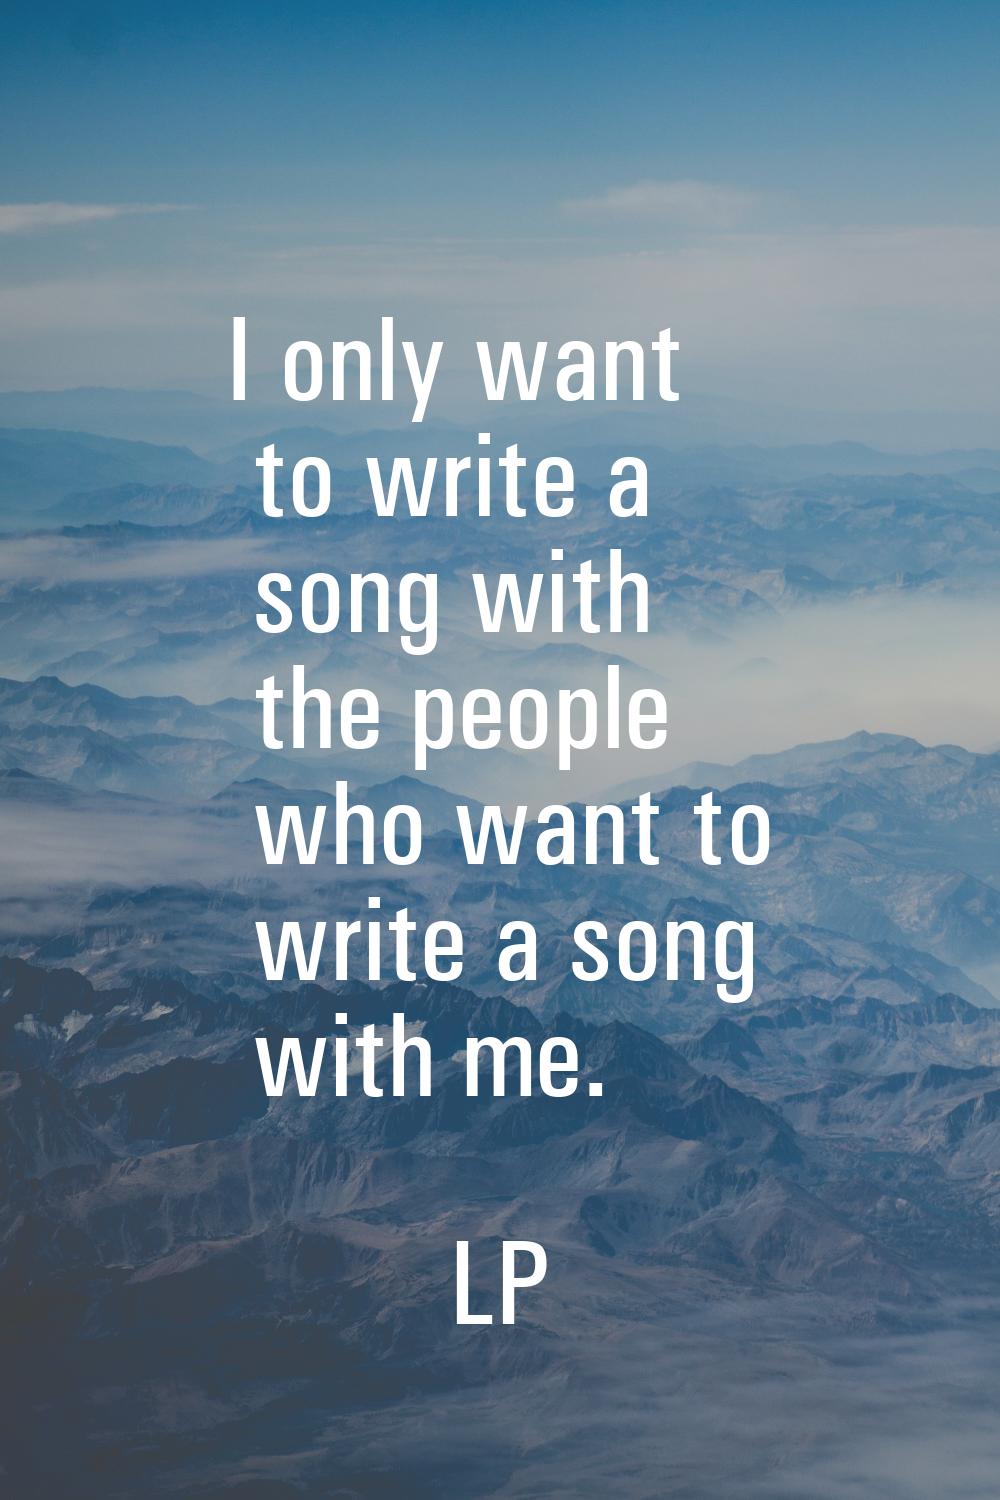 I only want to write a song with the people who want to write a song with me.